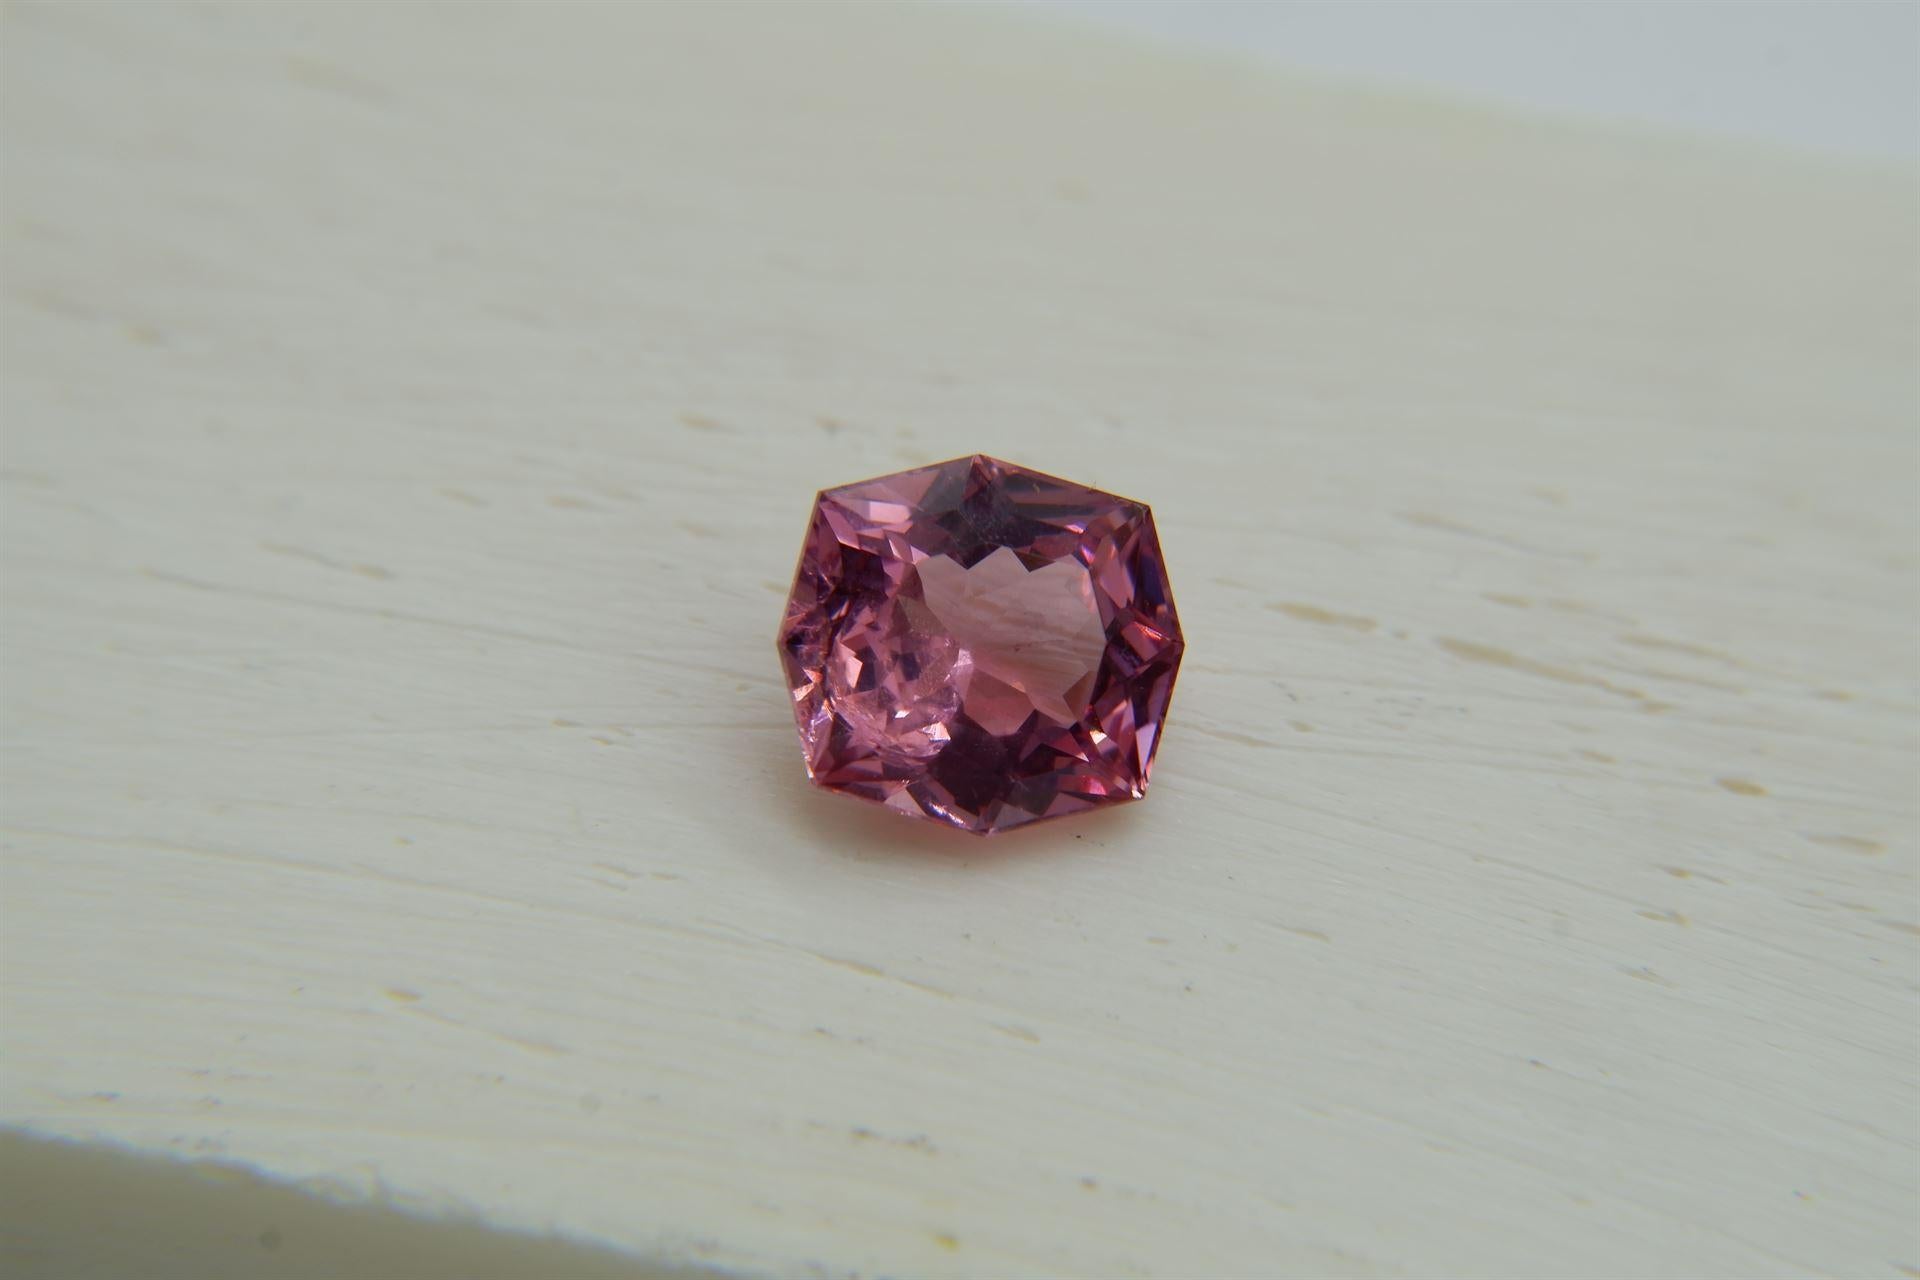 GEMSTONE TYPE: Unheated Natural Spinel
RECOMMENDED JEWELRY SETTINGS: Men Rings, Men Jewelry, Women Vintage Rings, Art Jewelry
CERTIFICATE: AGL/GIA Full Lab Report included
ORIGIN: Sri Lanka
CARAT SIZE: 2.104
DIMENSIONS: Length 8.22 x Width 7.60 x